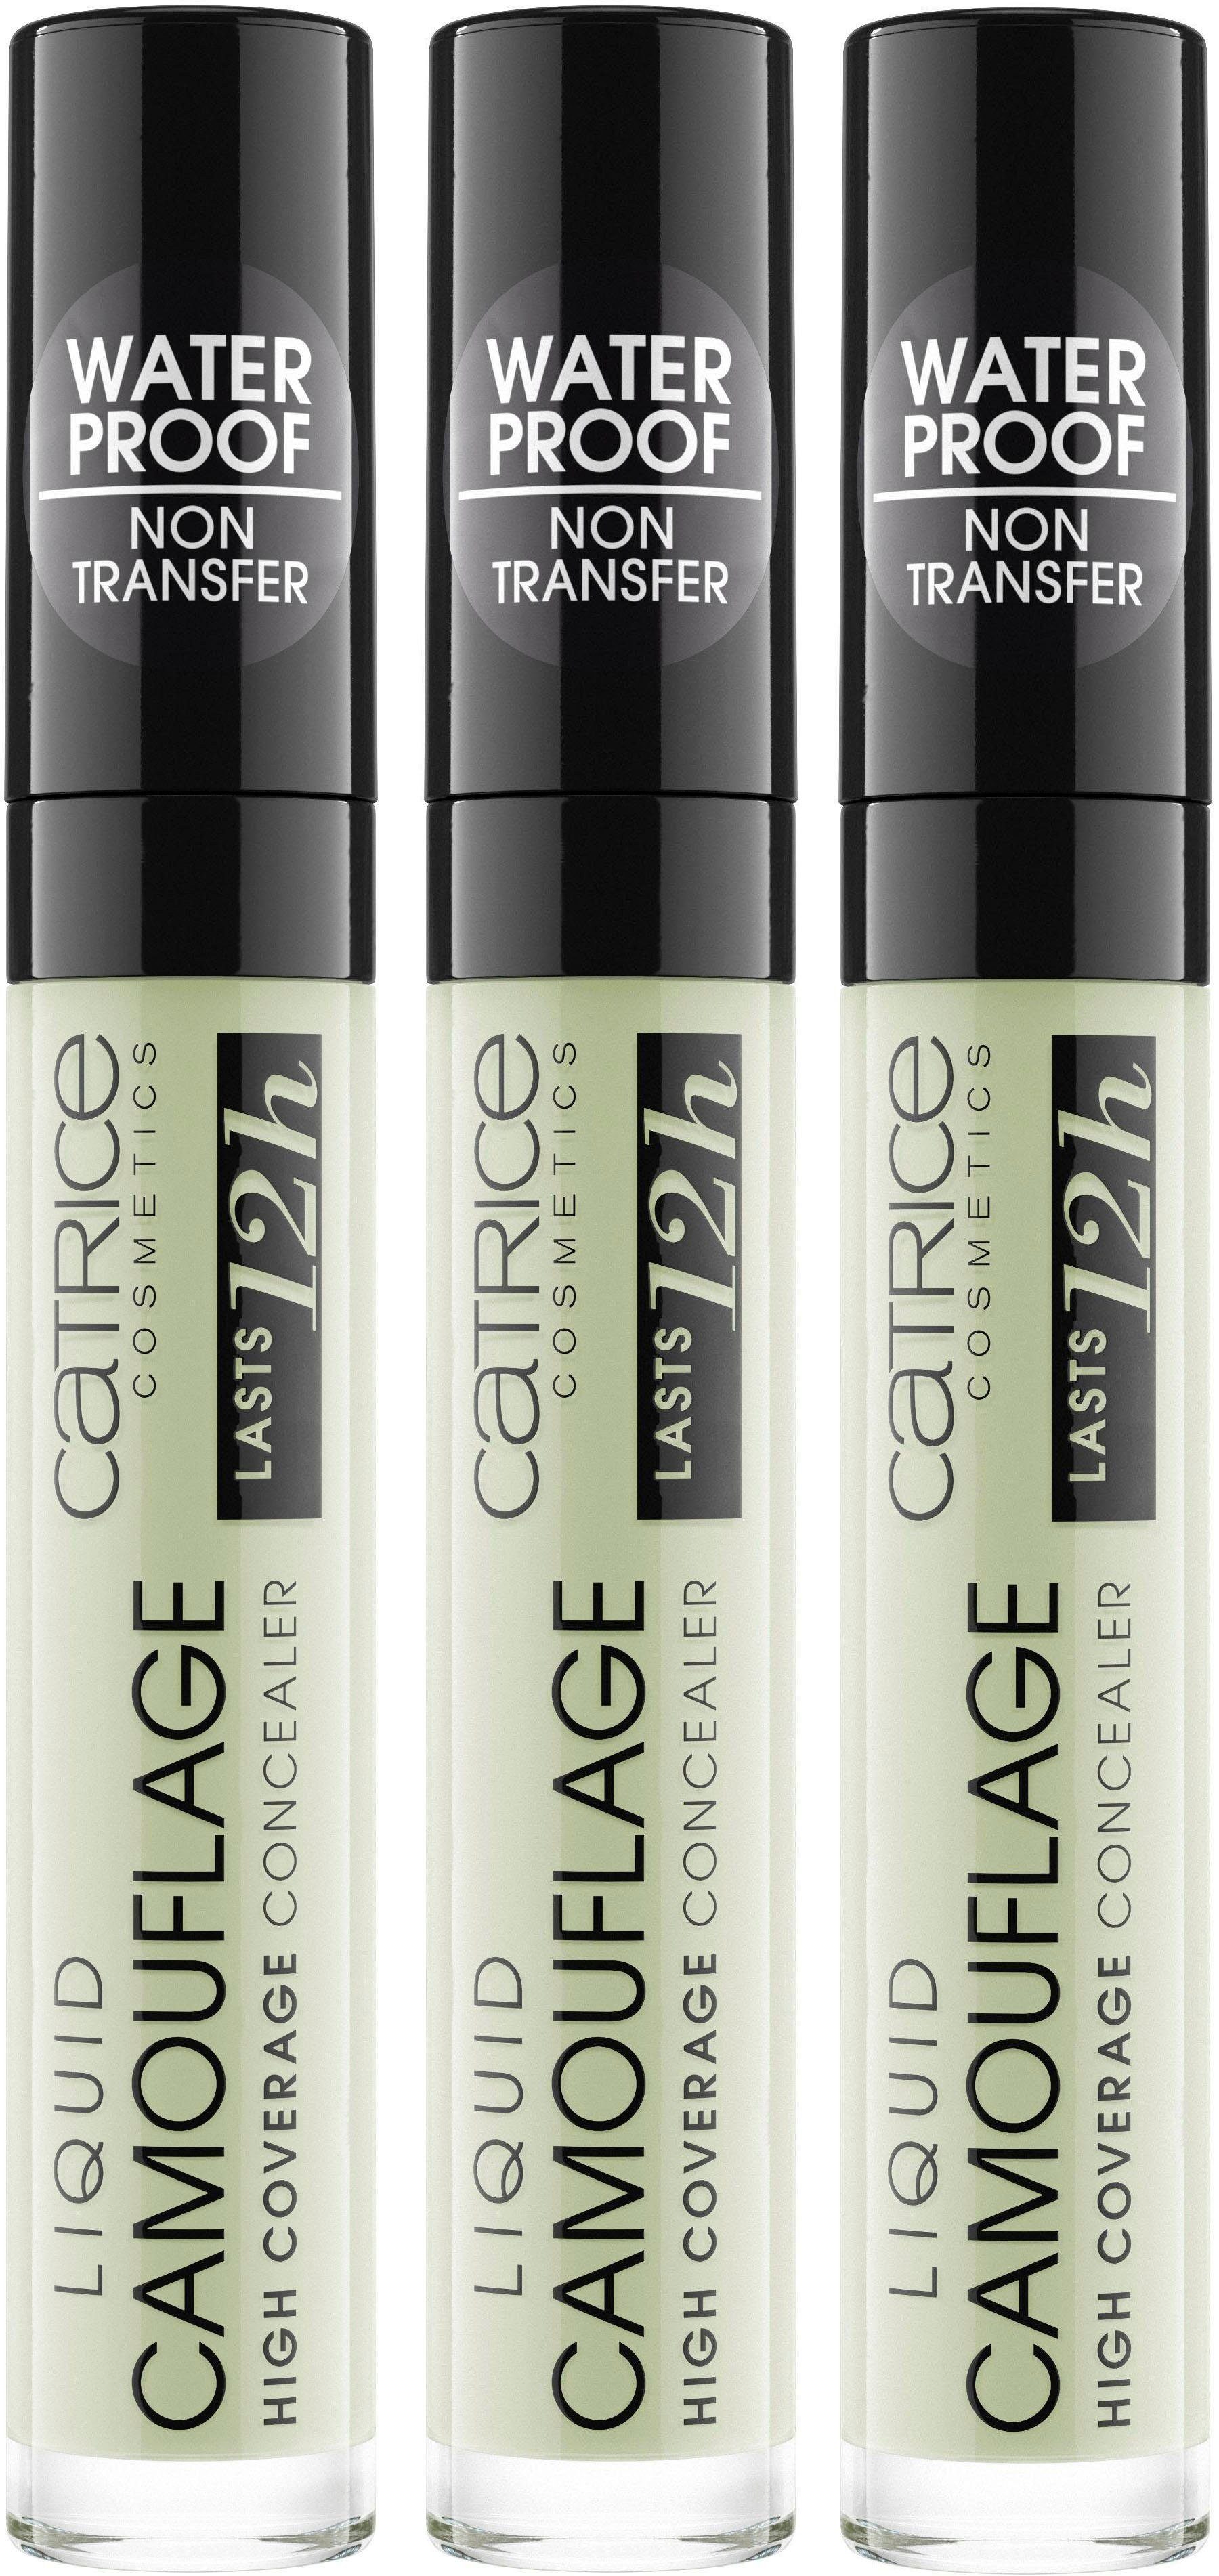 High Anti-Red Coverage, Liquid Concealer Catrice 200 Pack Camouflage 3er